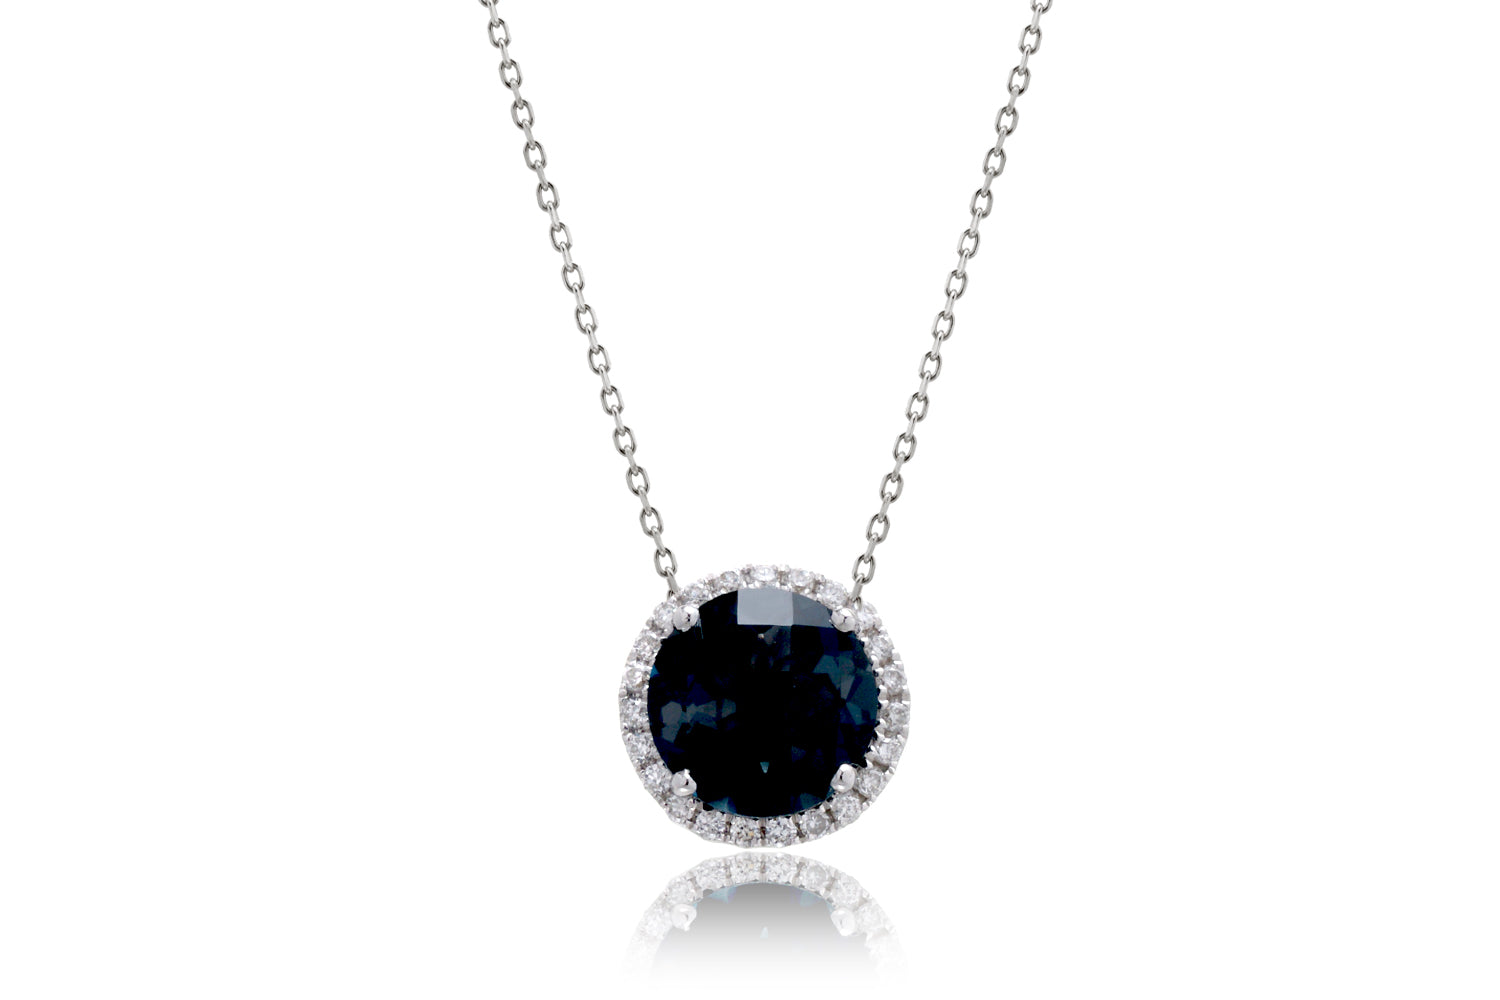 The Ophelia Round London Topaz Necklace (6mm)